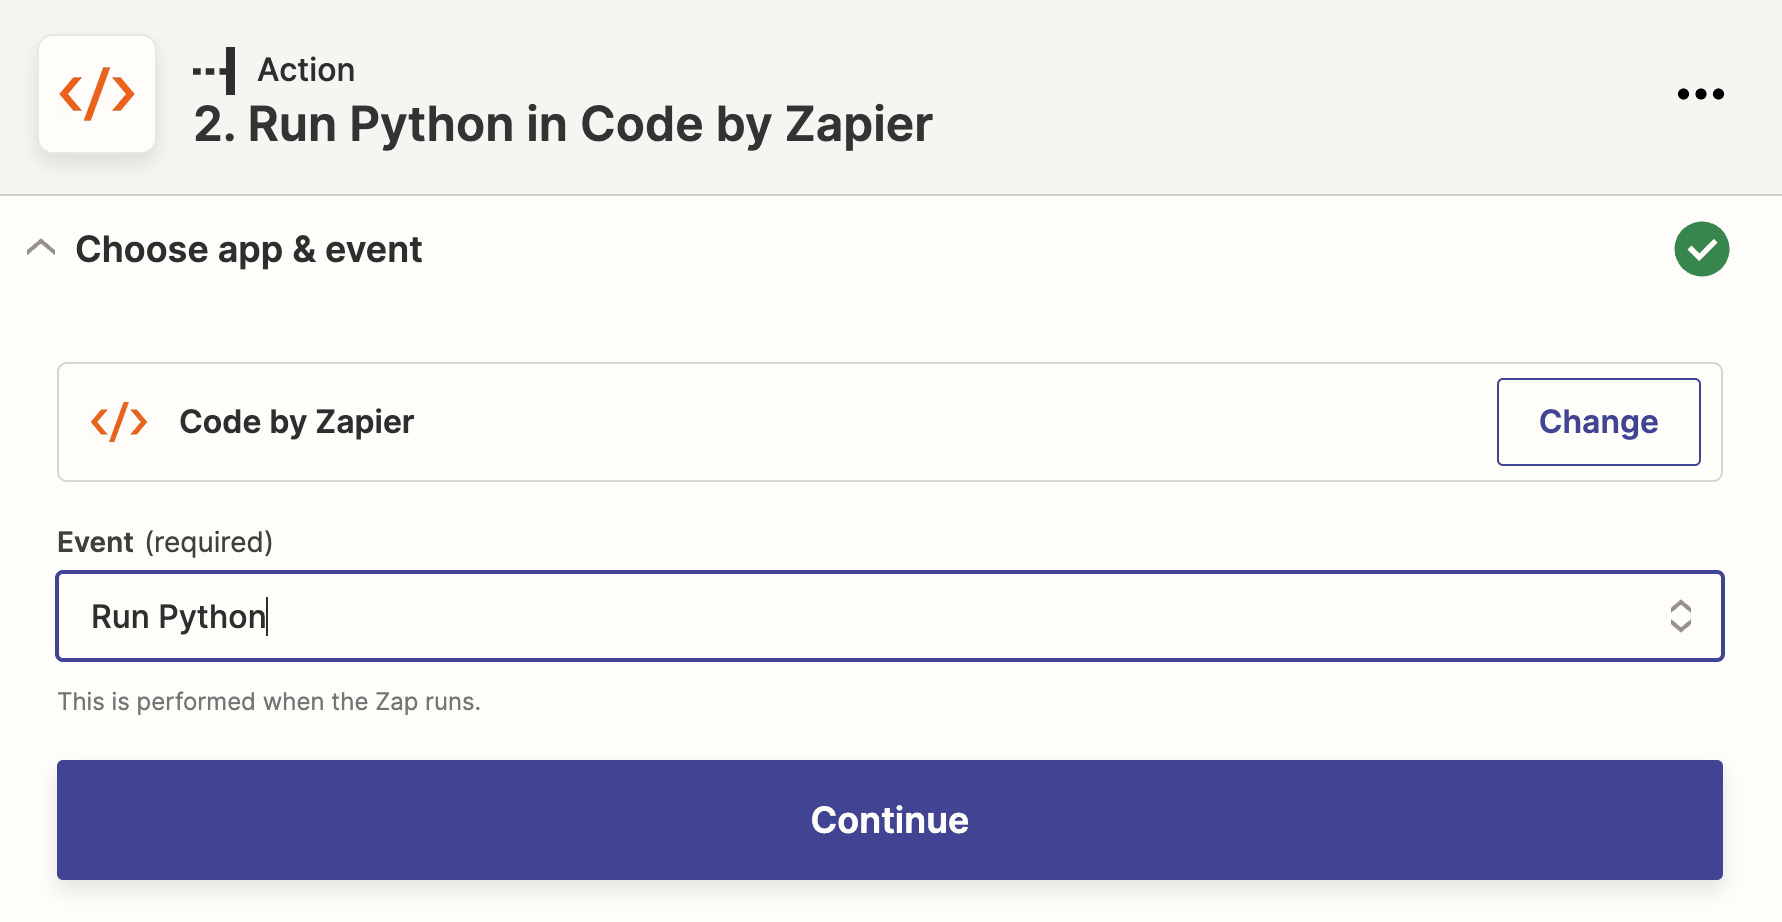 Code by Zapier action with a Run Python event